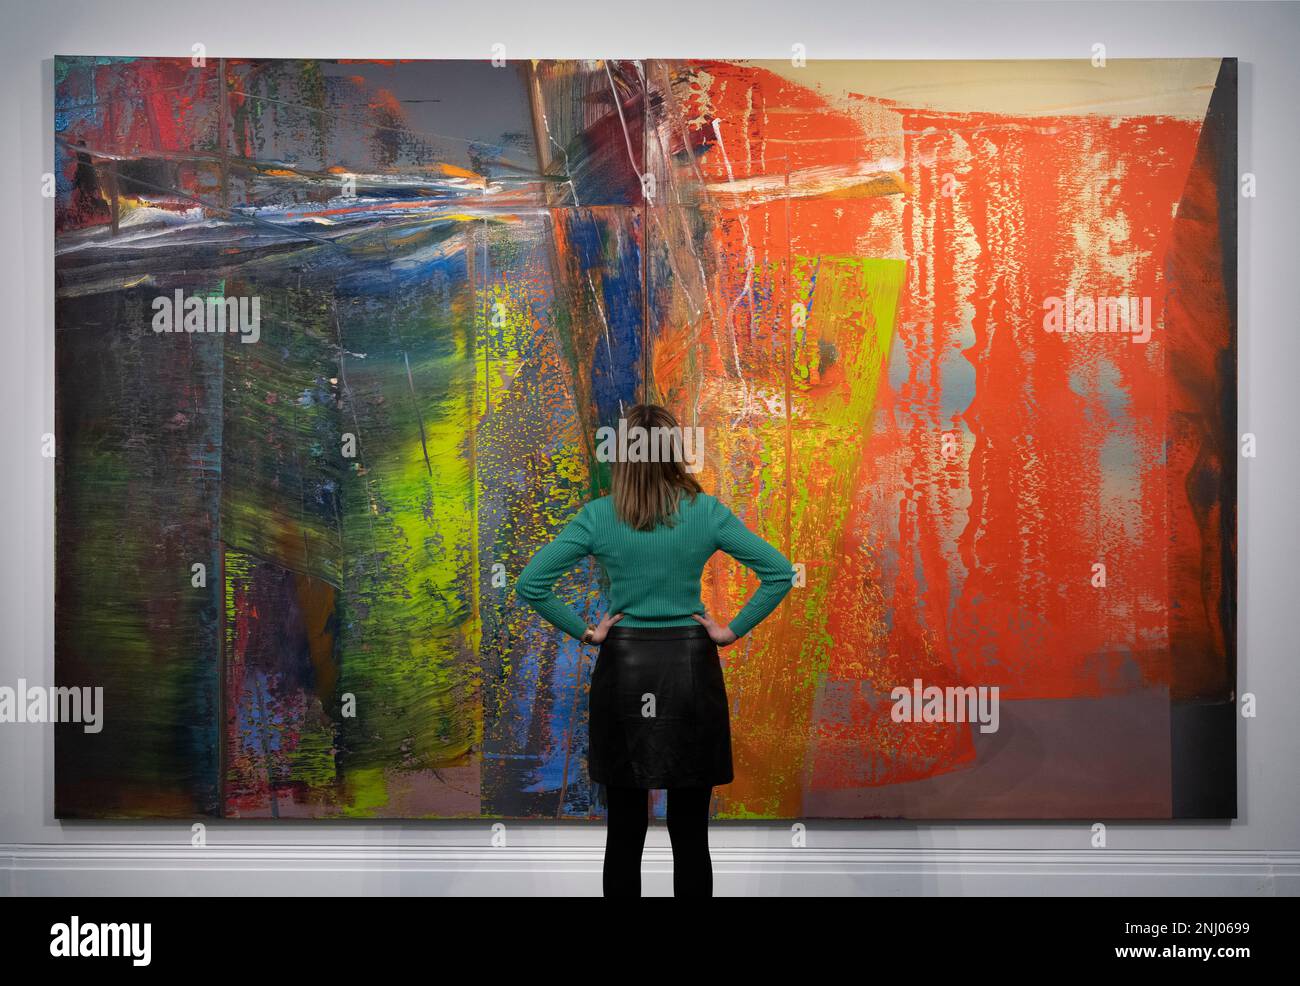 Sotheby‘s, London, UK. 22 February 2023. The Modern & Contemporary and Now Evening Auctions take place on 1 March. Highlights include: Abstraktes Bild, one of Gerhard Richter’s Greatest Monumental Abstract Masterpieces, estimated in excess of £20 million. Credit: Malcolm Park/Alamy Live News. Stock Photo